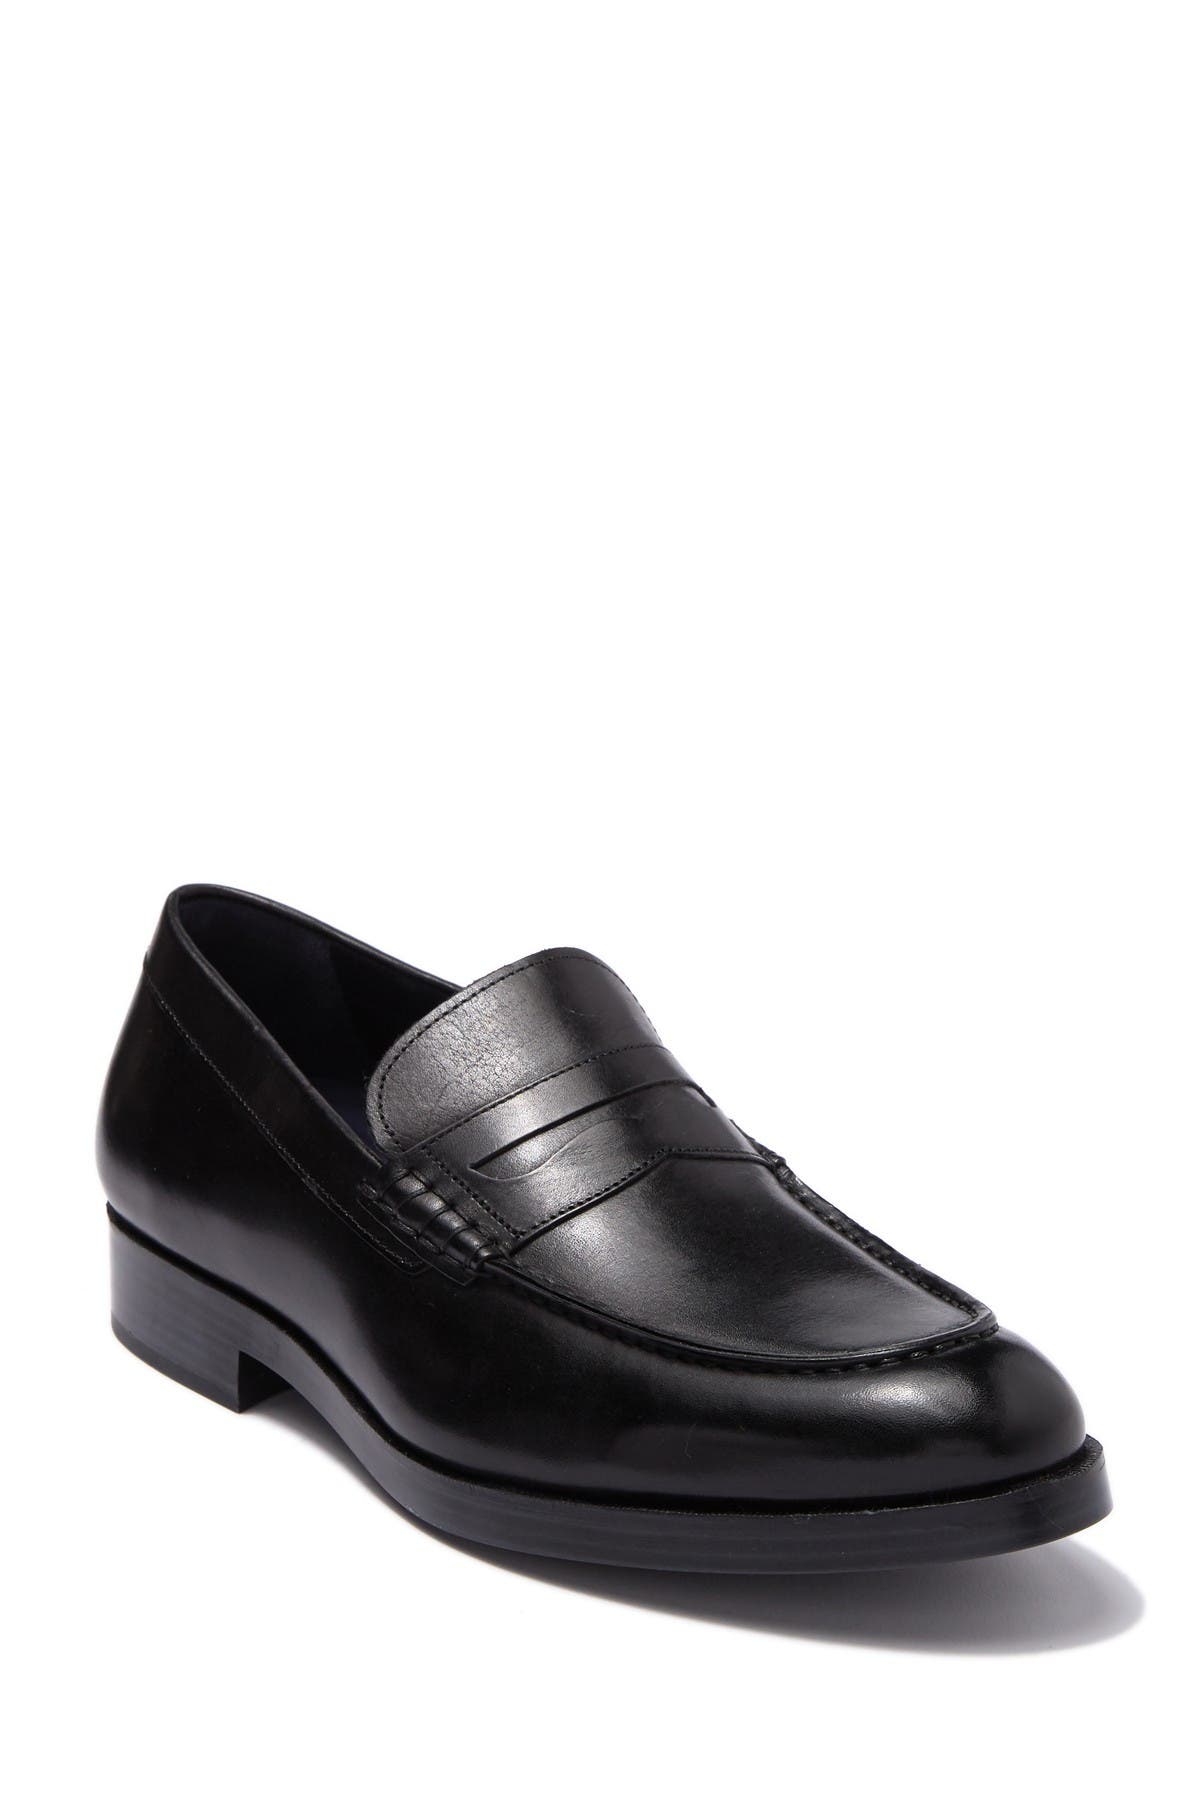 cole haan harrison grand penny loafer